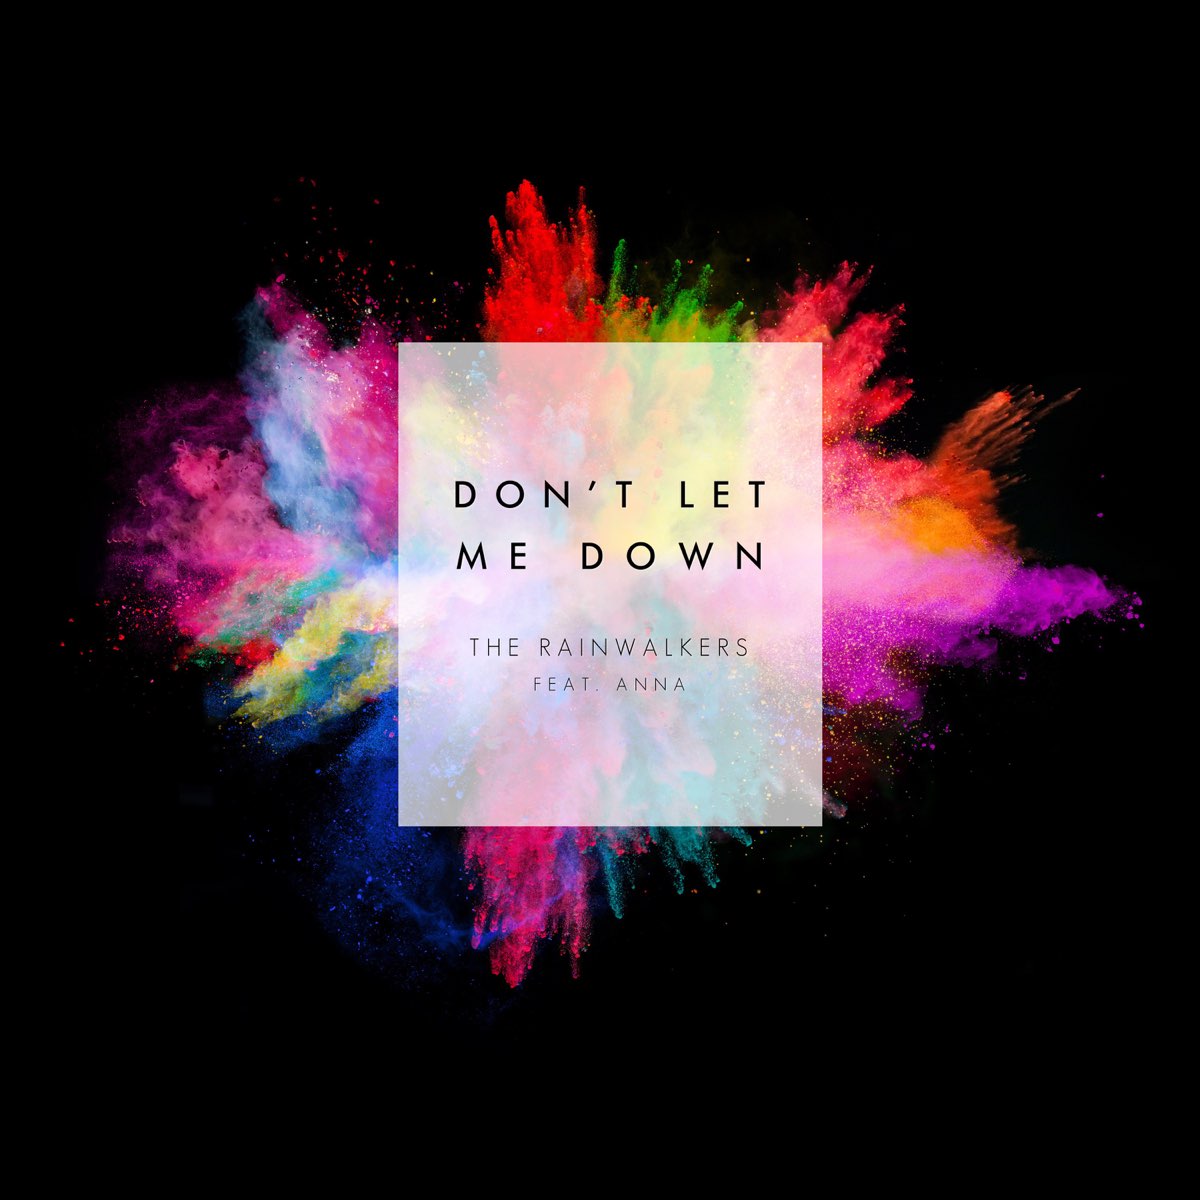 Dont feat. Don`t Let me down. Don't Let me down обложка. The Chainsmokers don't Let me down. Don't Let me down the Chainsmokers обложка.